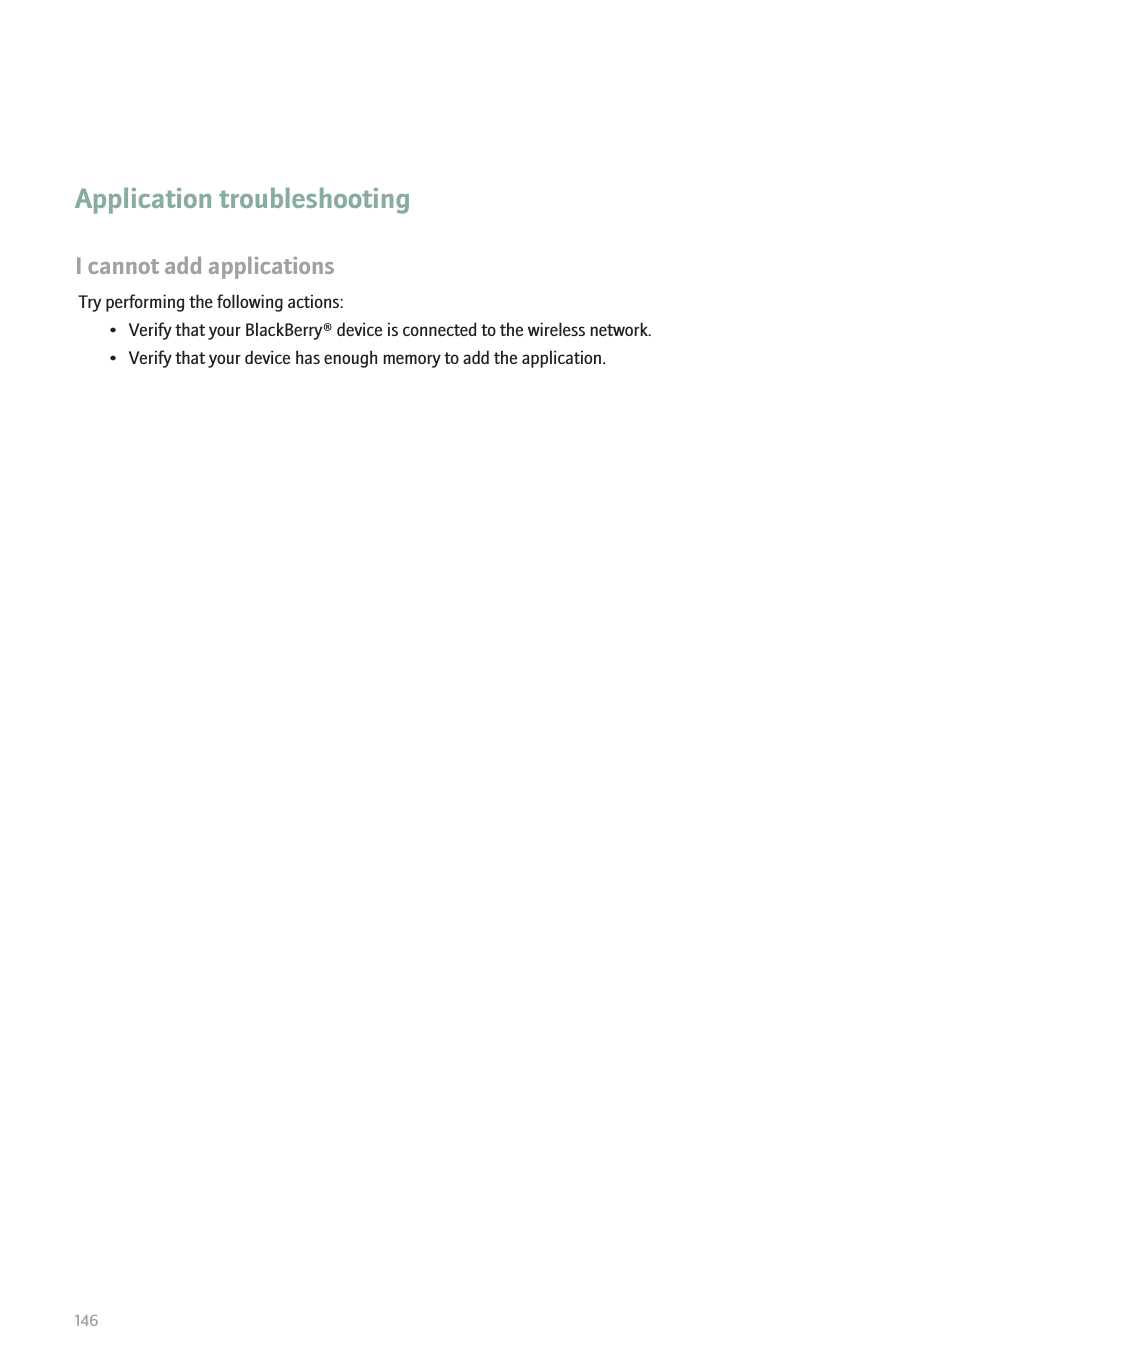 Application troubleshootingI cannot add applicationsTry performing the following actions:• Verify that your BlackBerry® device is connected to the wireless network.• Verify that your device has enough memory to add the application.146